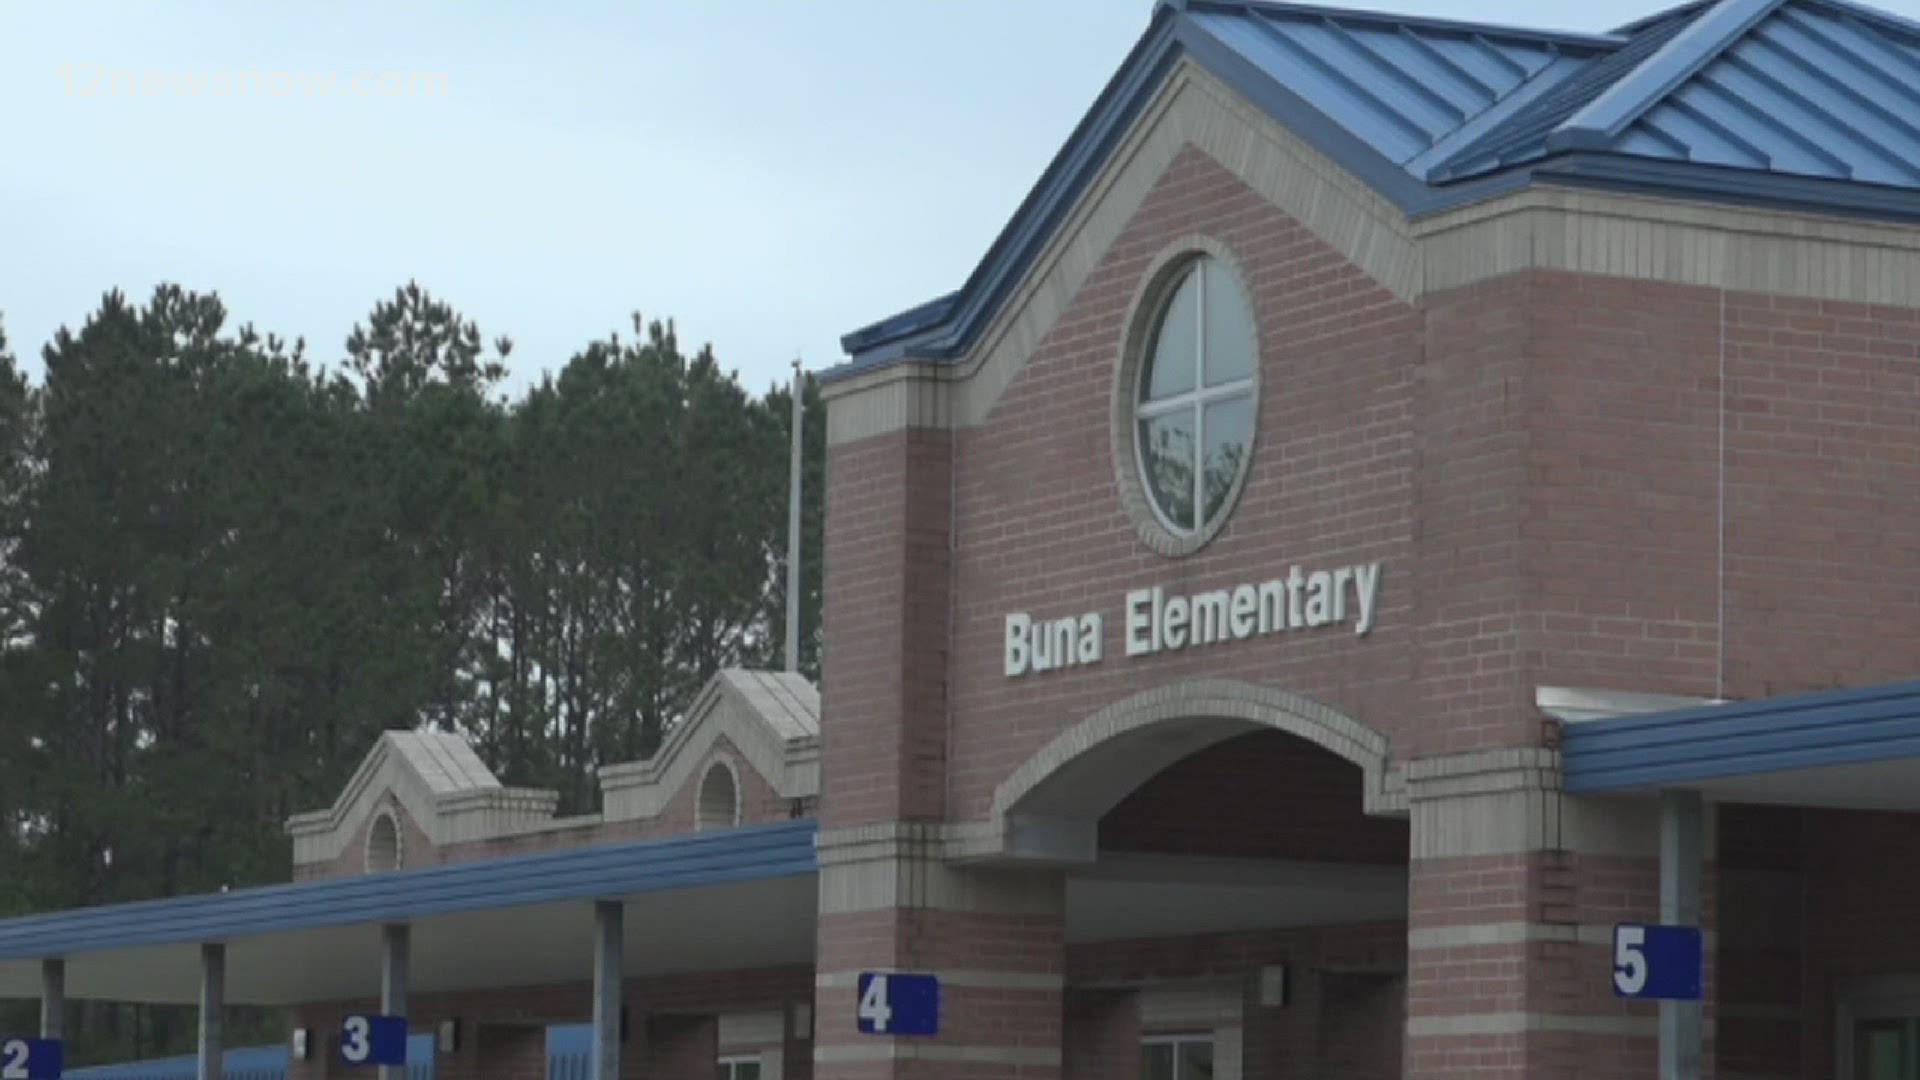 Buna ISD's superintendent said the students, staff and teachers were 'amazing' at handling the situation